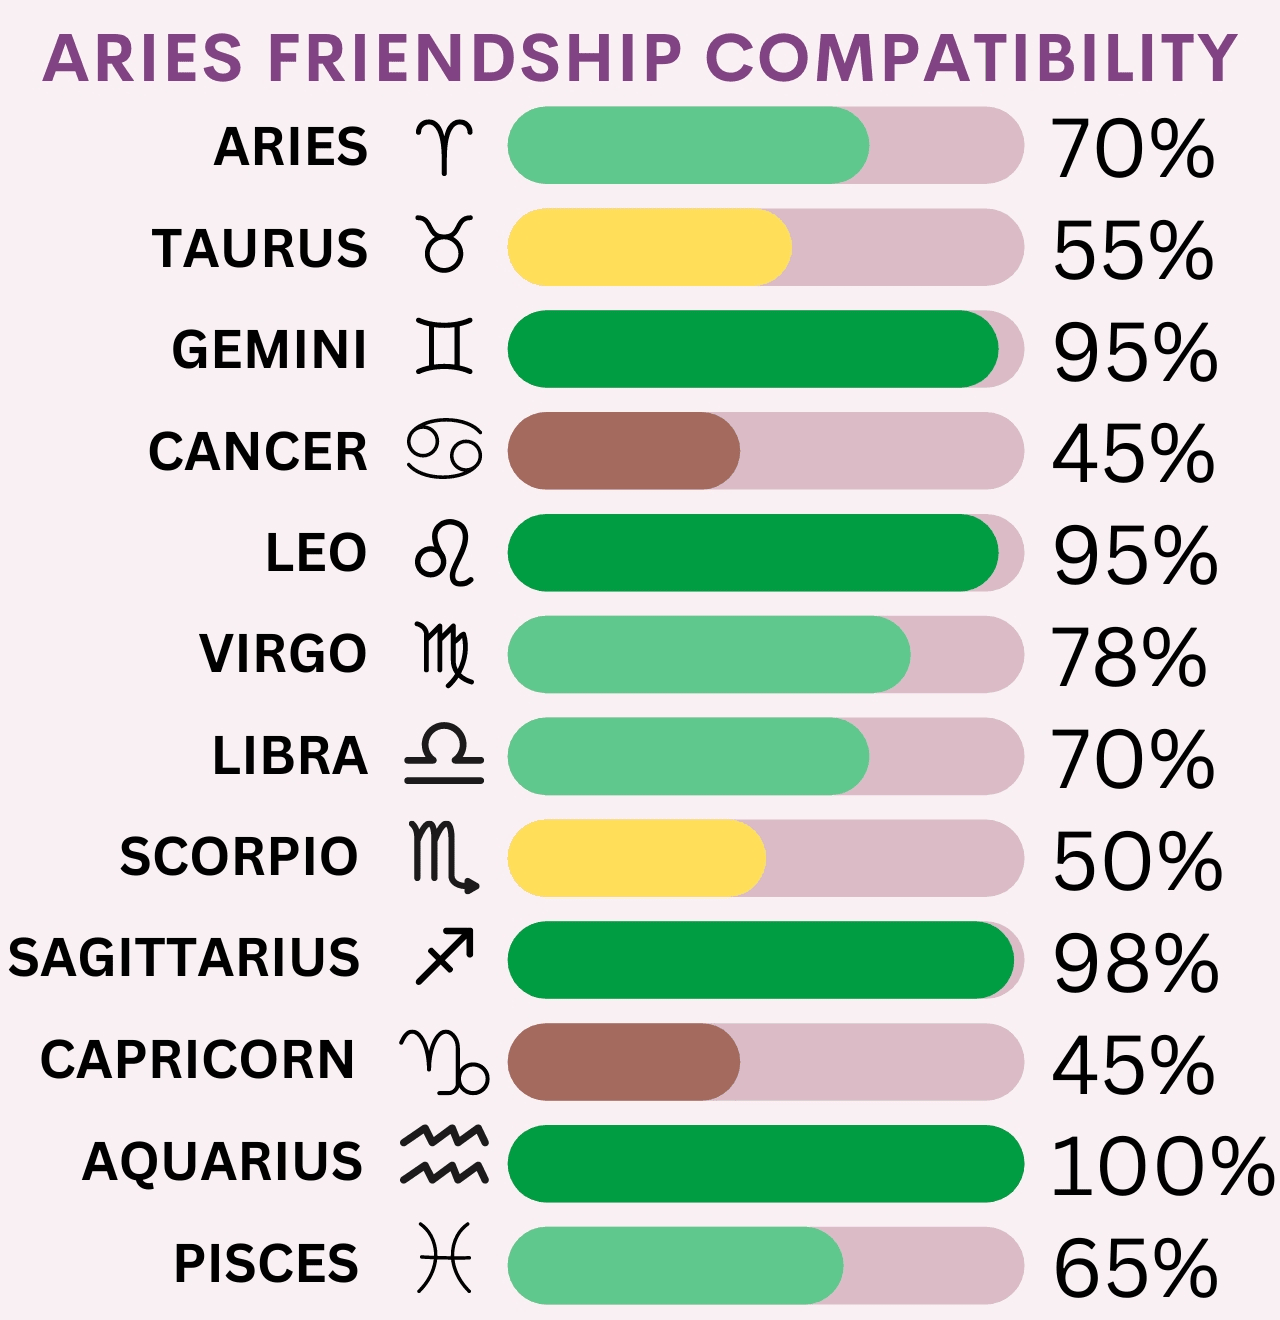 Aries Friendship Compatibility Chart